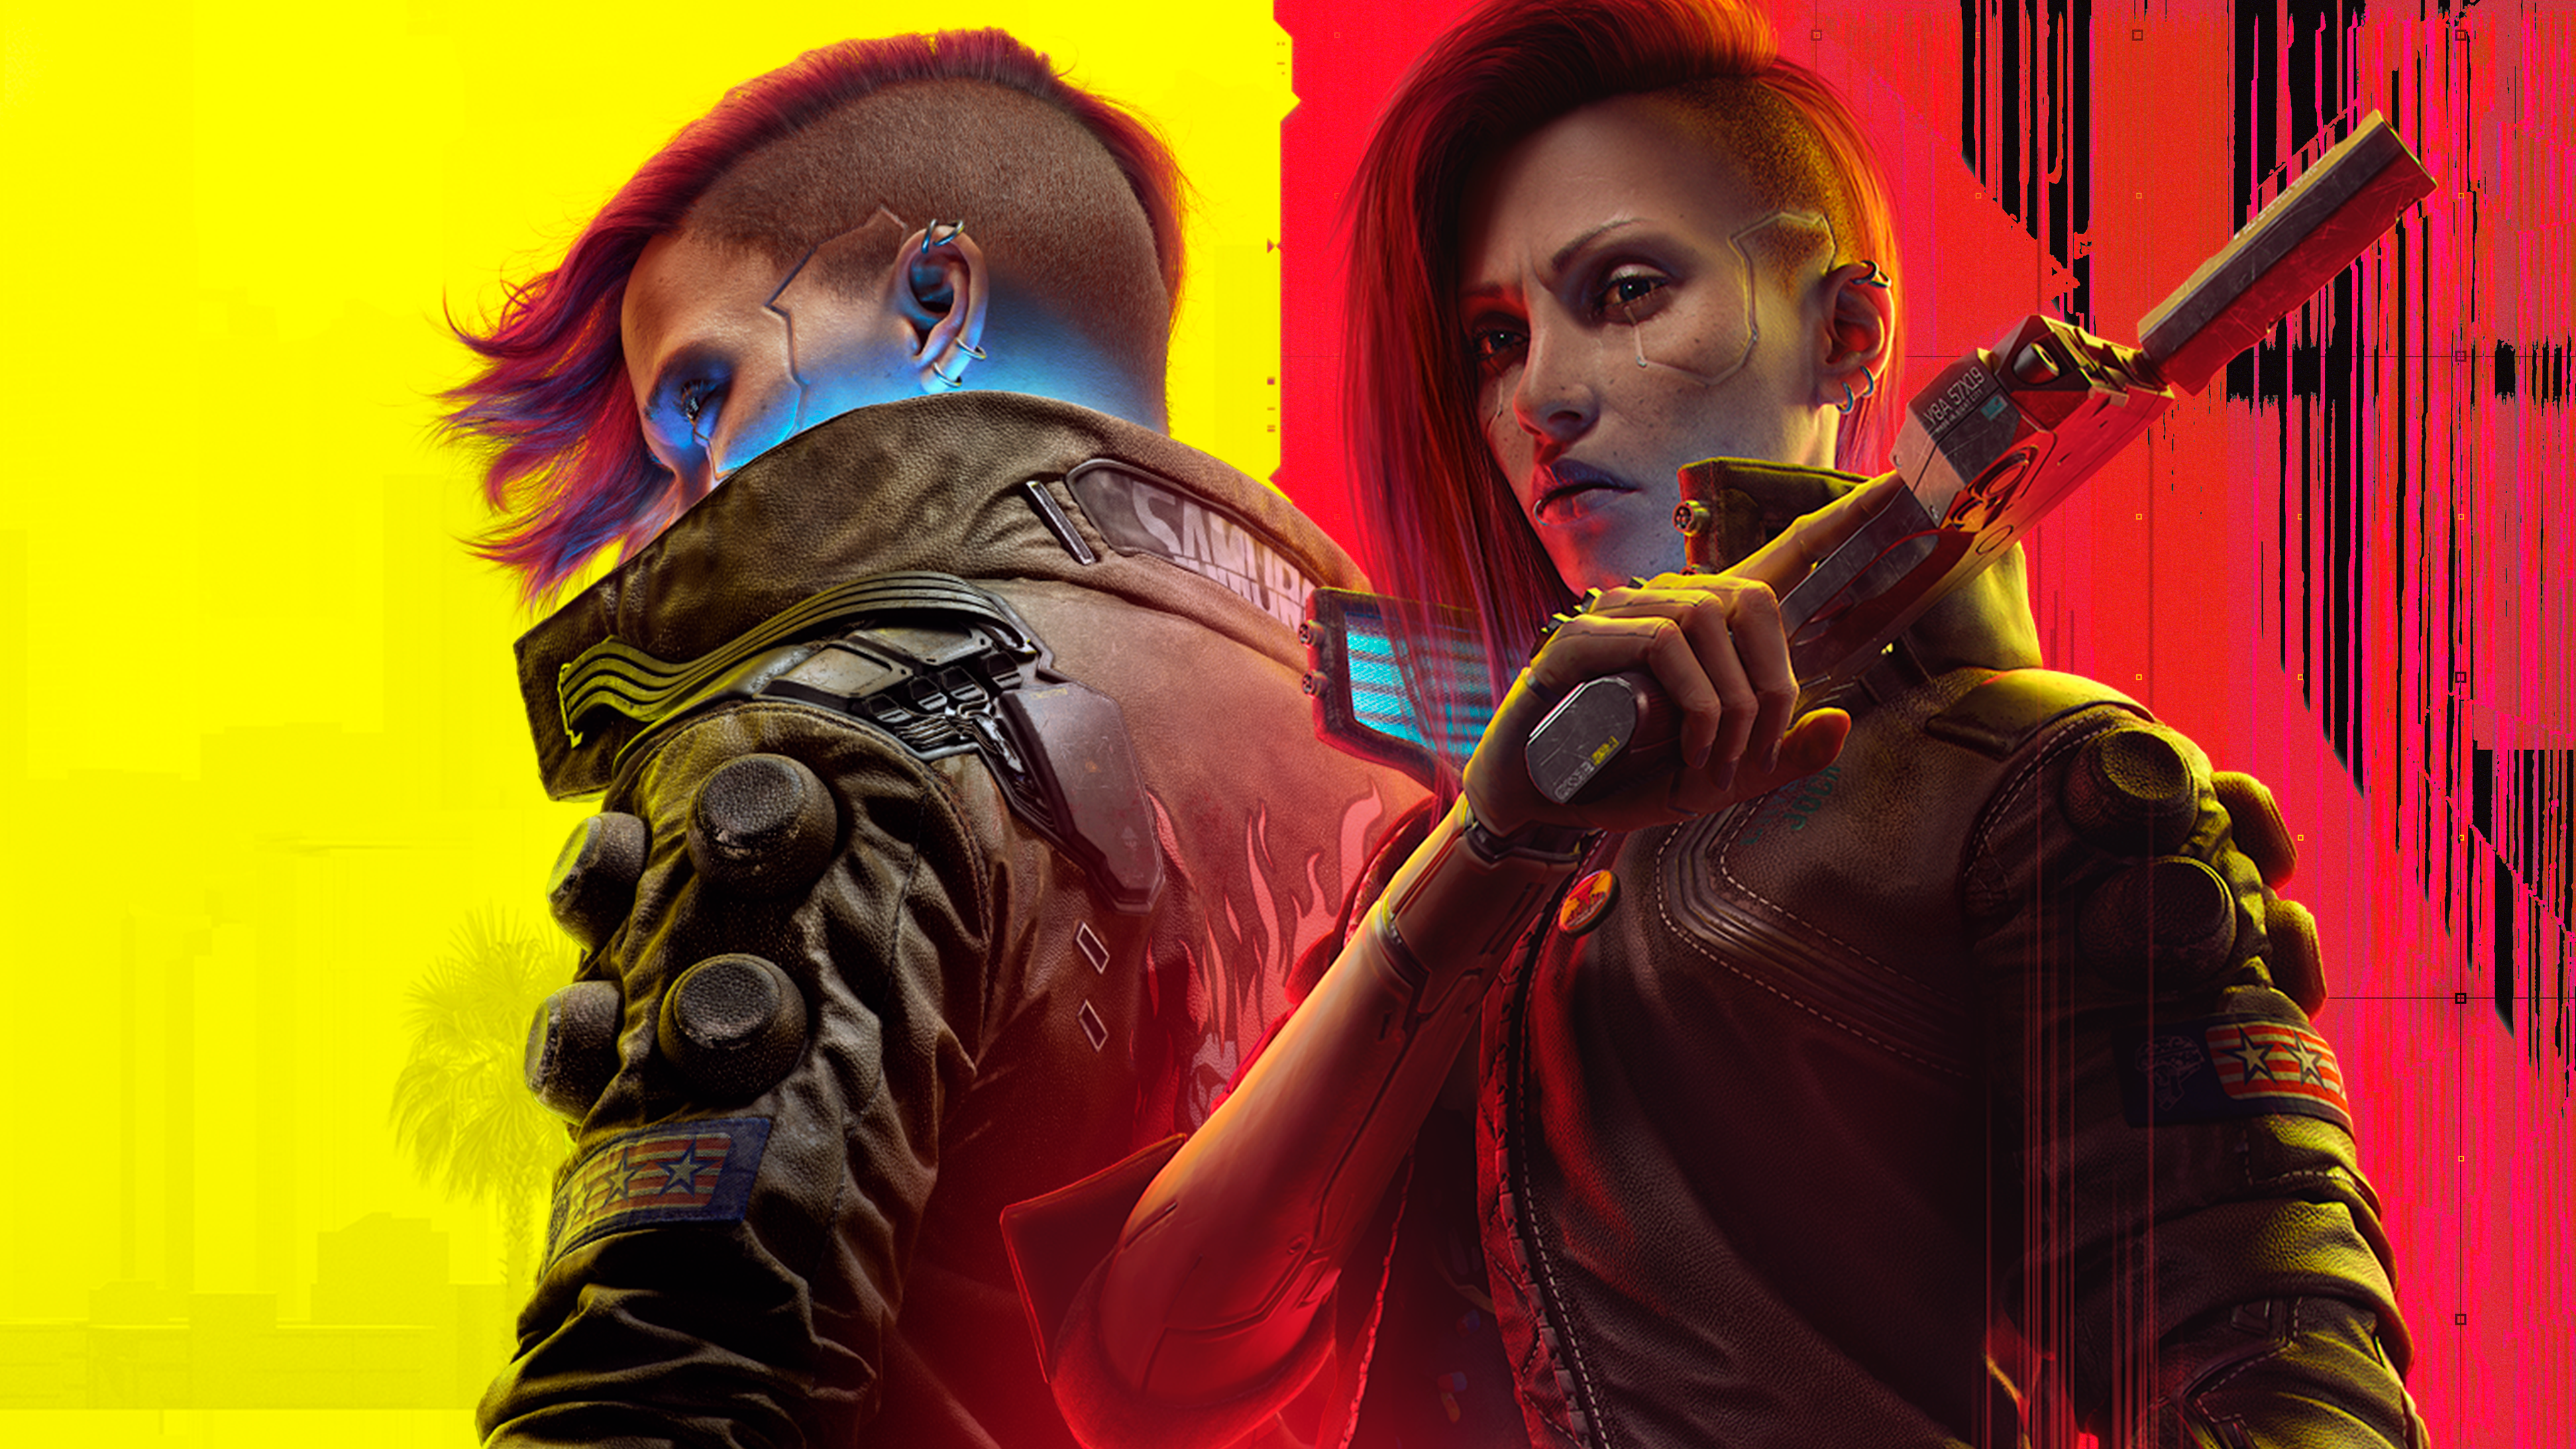 490+ Cyberpunk 2077 HD Wallpapers and Backgrounds